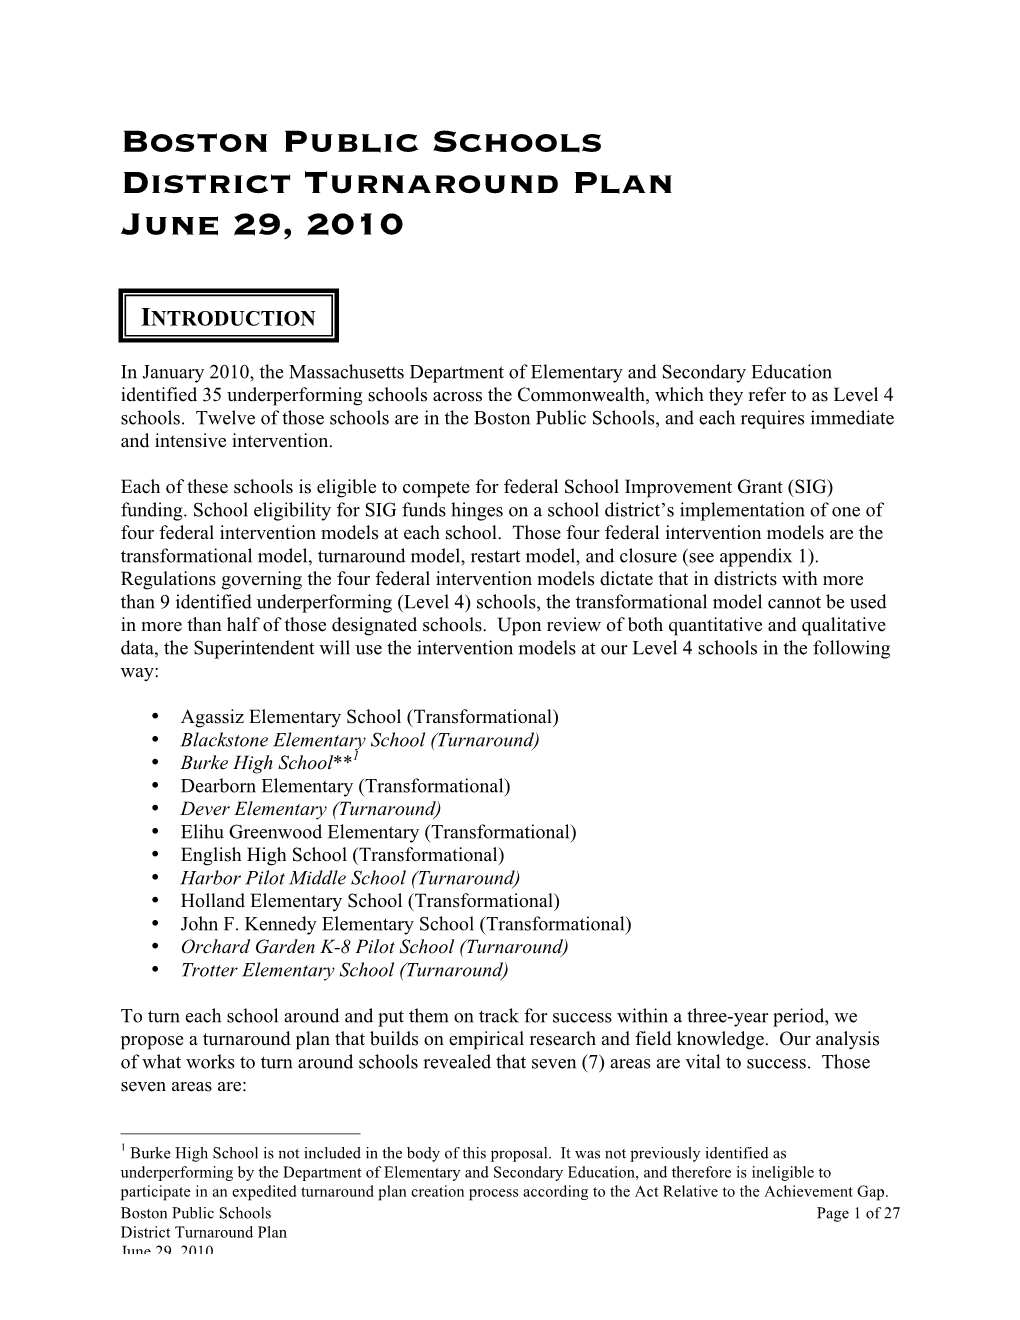 Read the Final BPS District Turnaround Plan